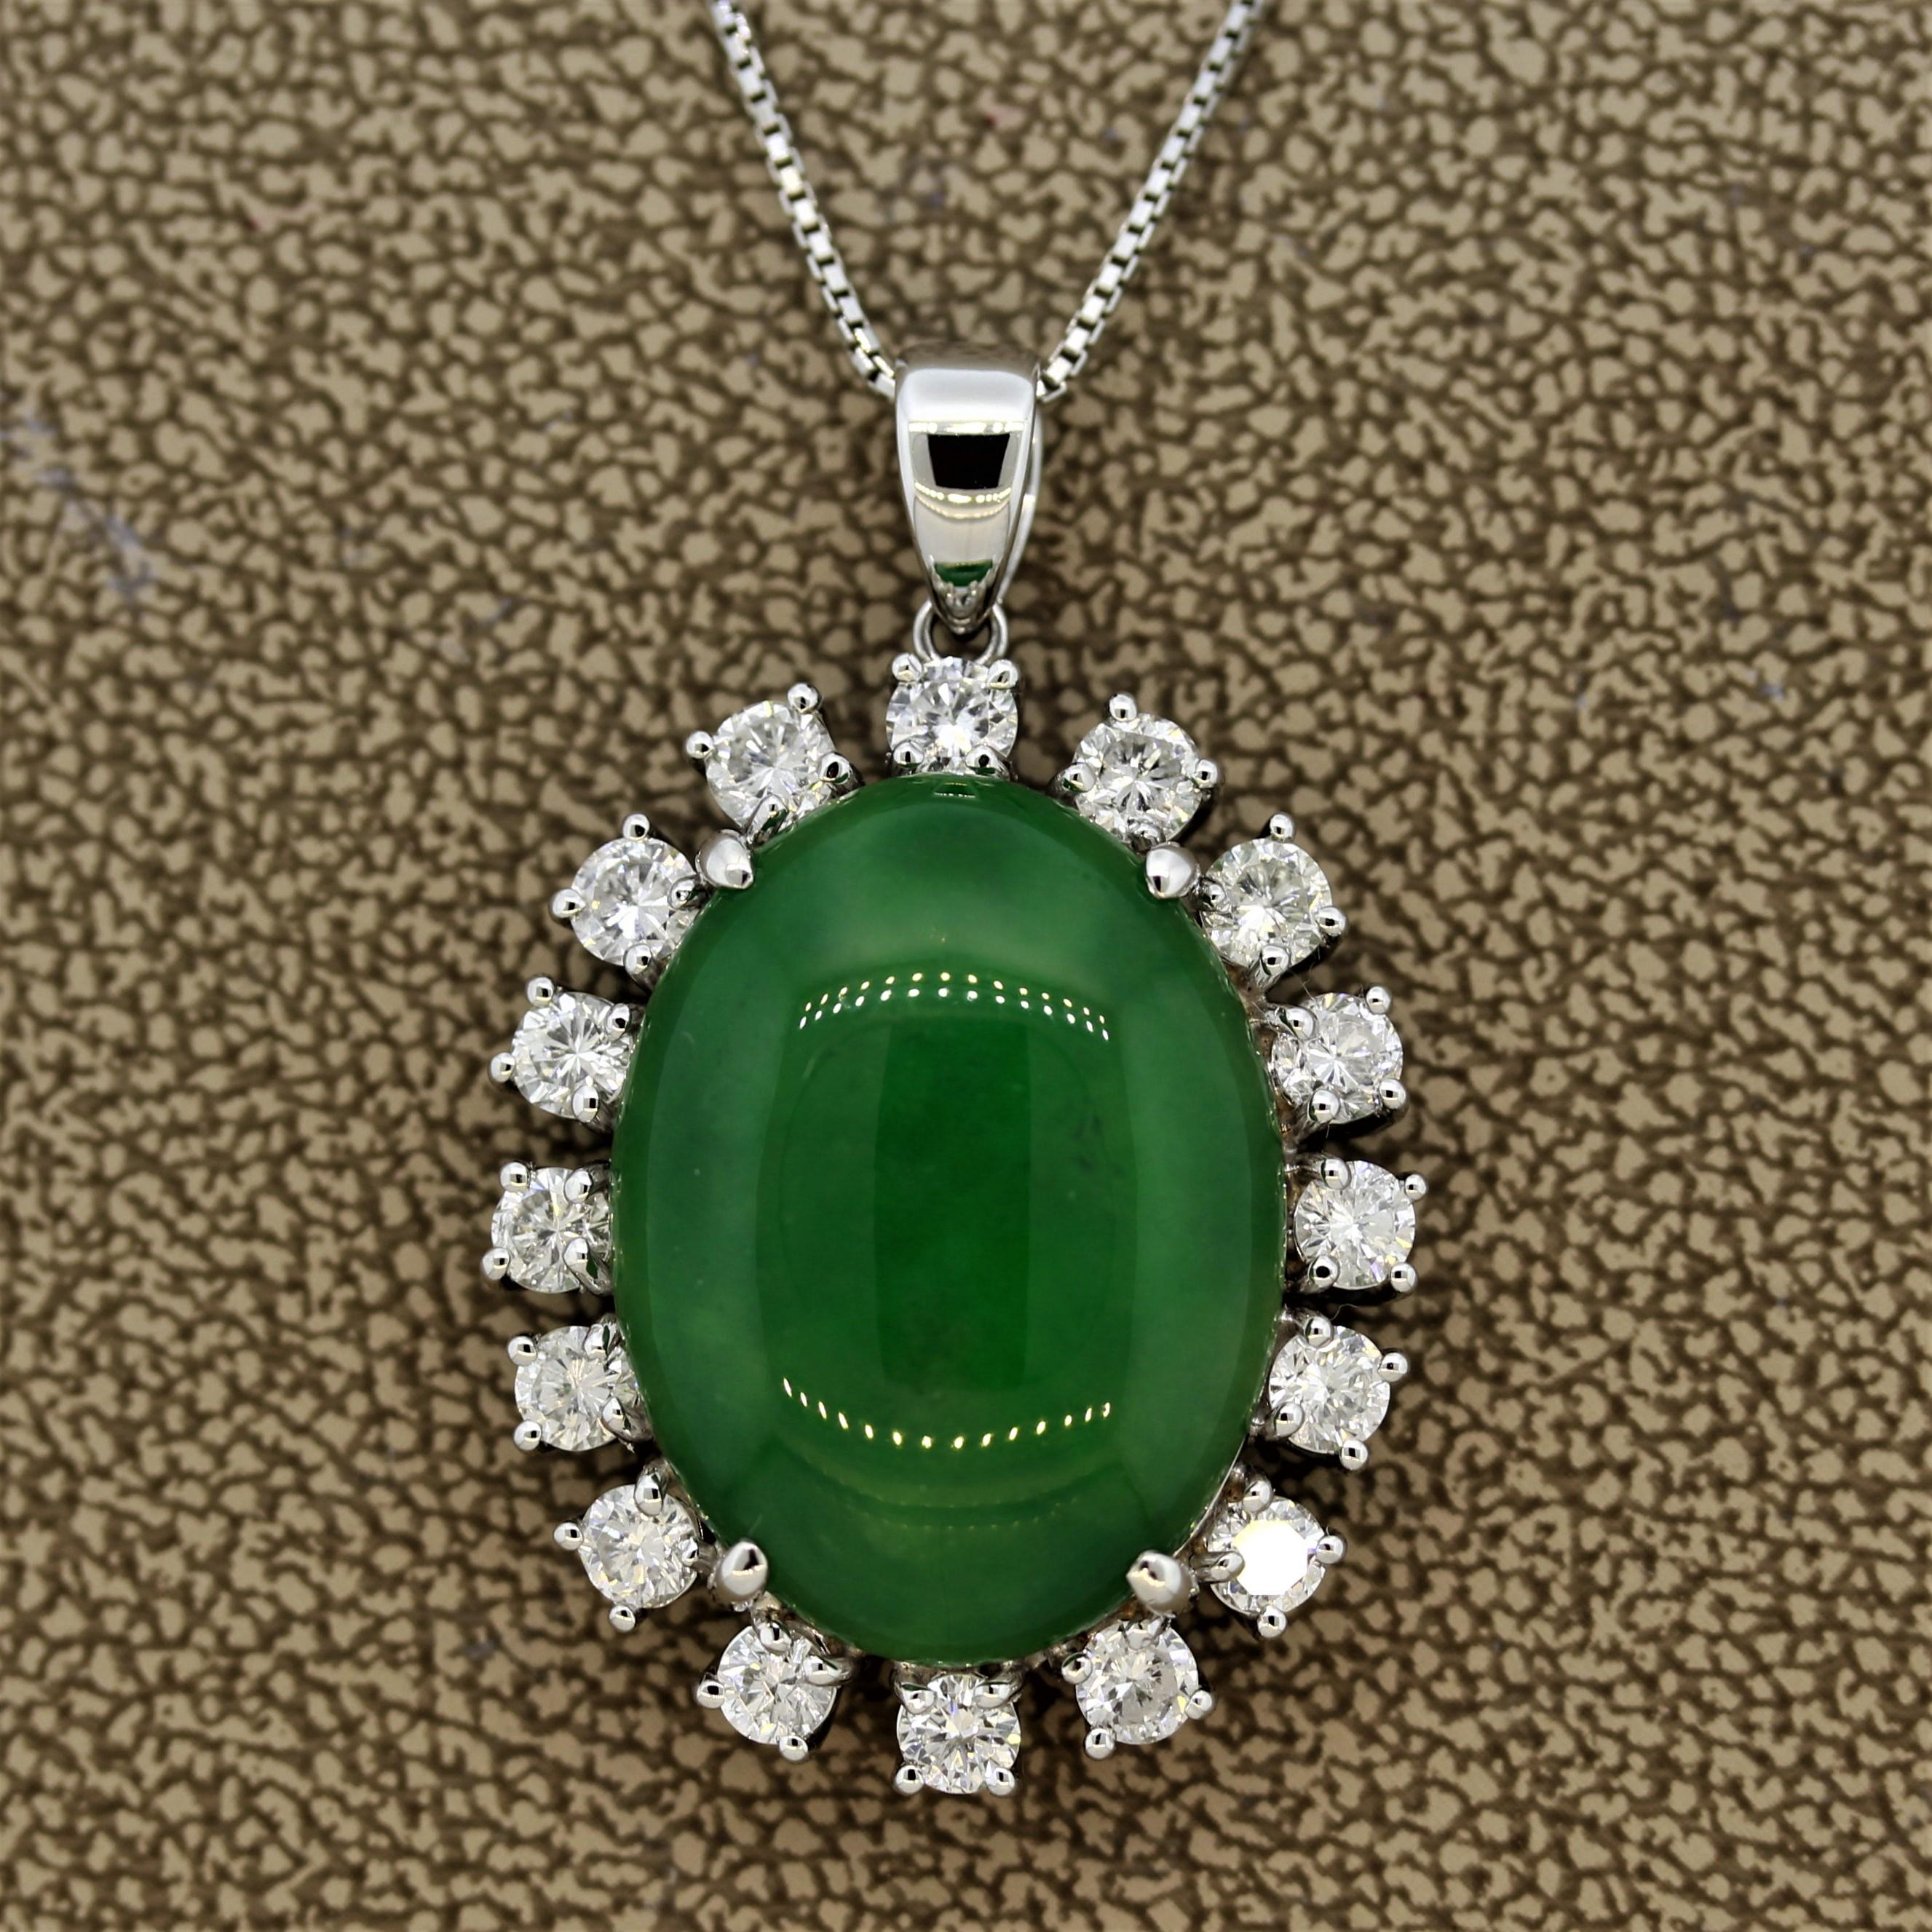 A large and luscious piece of natural jade weighing 15.26 carats takes center stage in this platinum piece. The jade is haloed by 1.88 carats of larger round brilliant cut diamonds each in a platinum 4-prong setting.

Pendant Length: 1.25